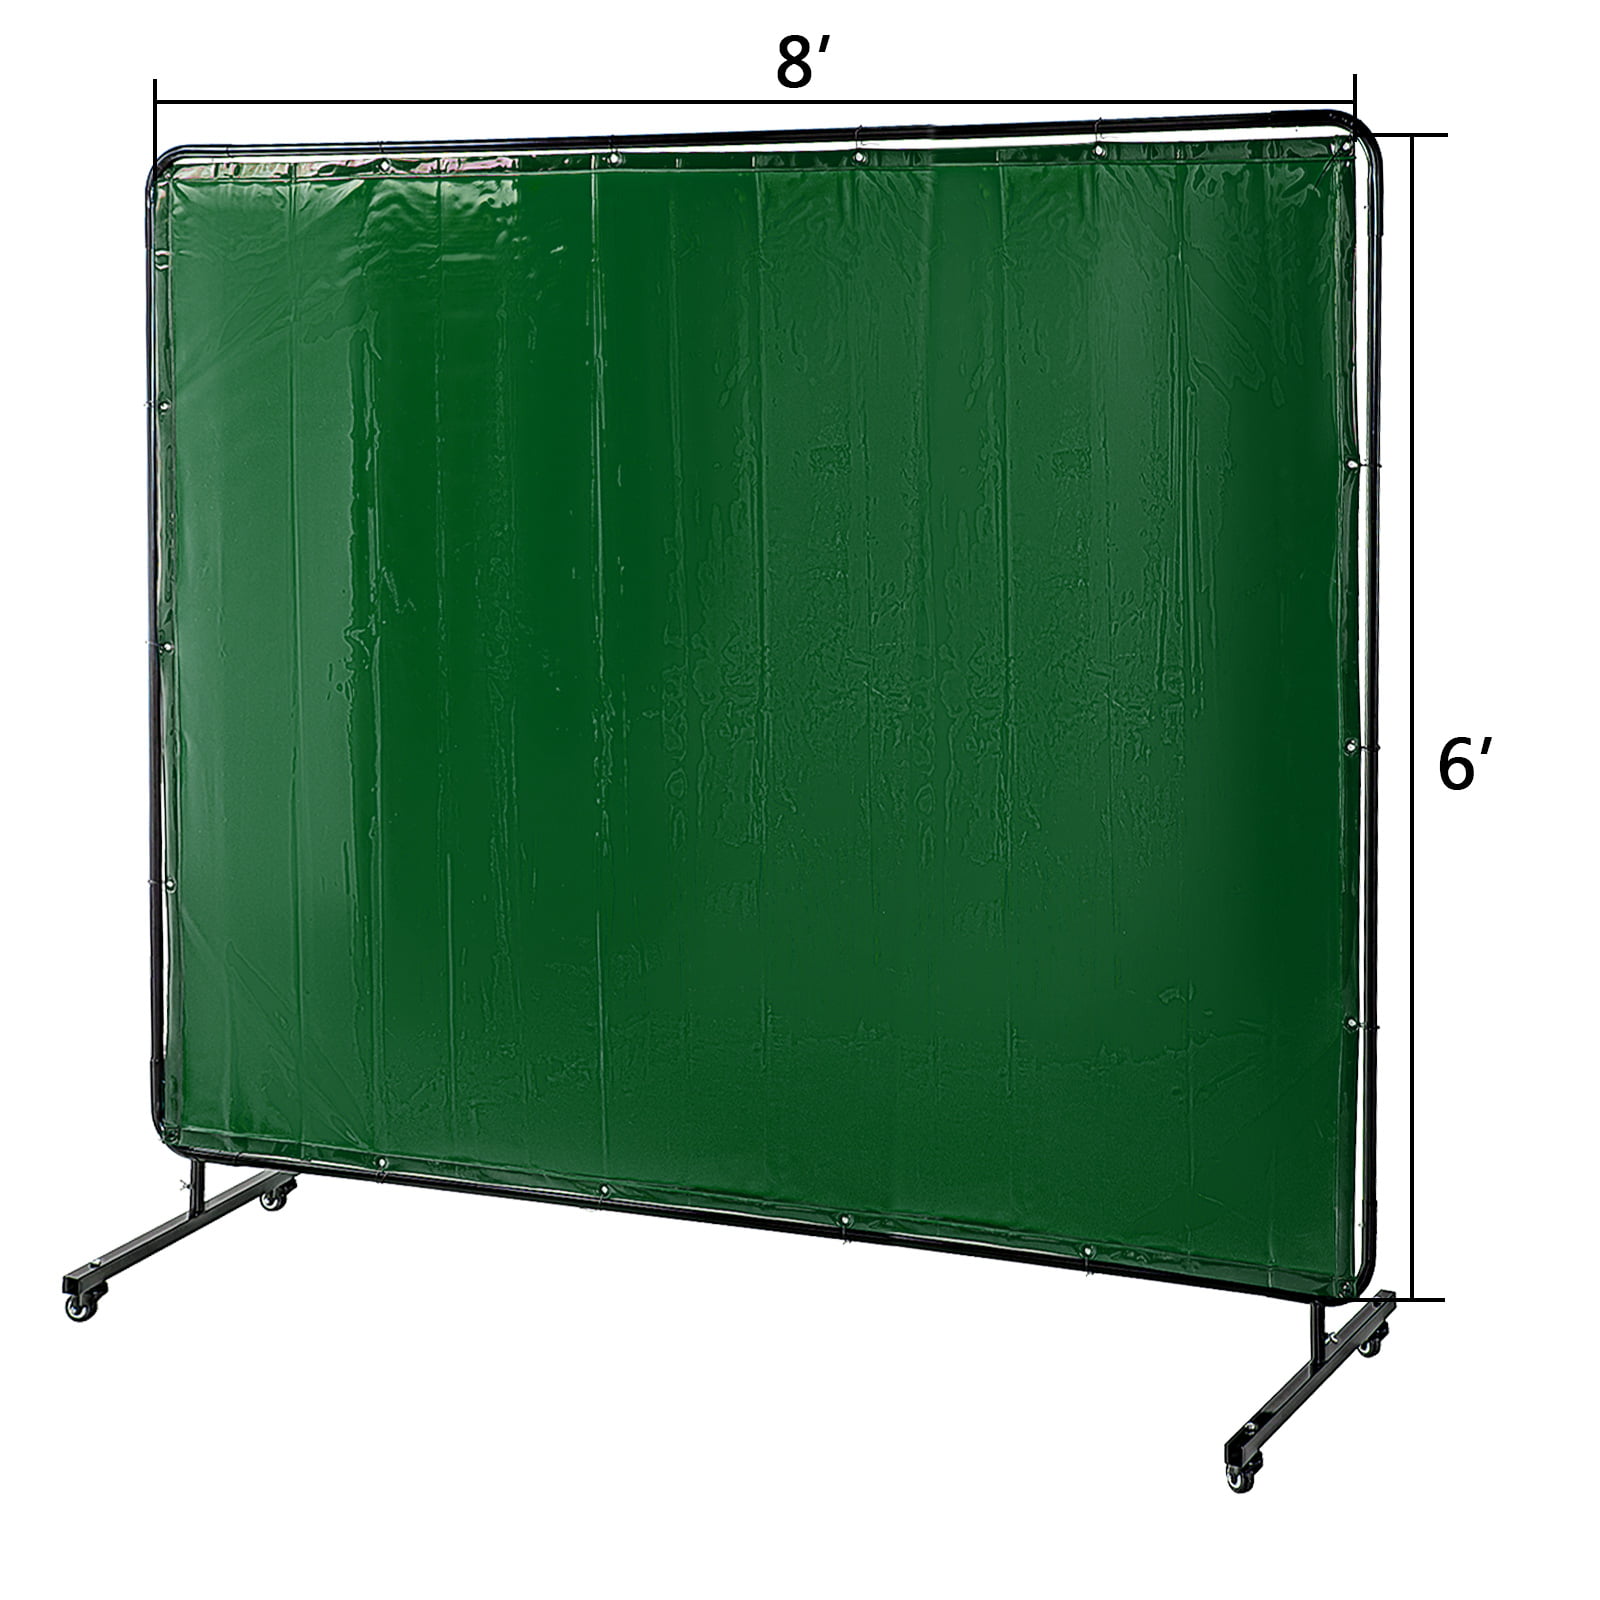 Mophorn 8 x 6 Welding Screen with Frame Red Vinyl Portable Welding Curtain with Wheels Welding Protection Screen 